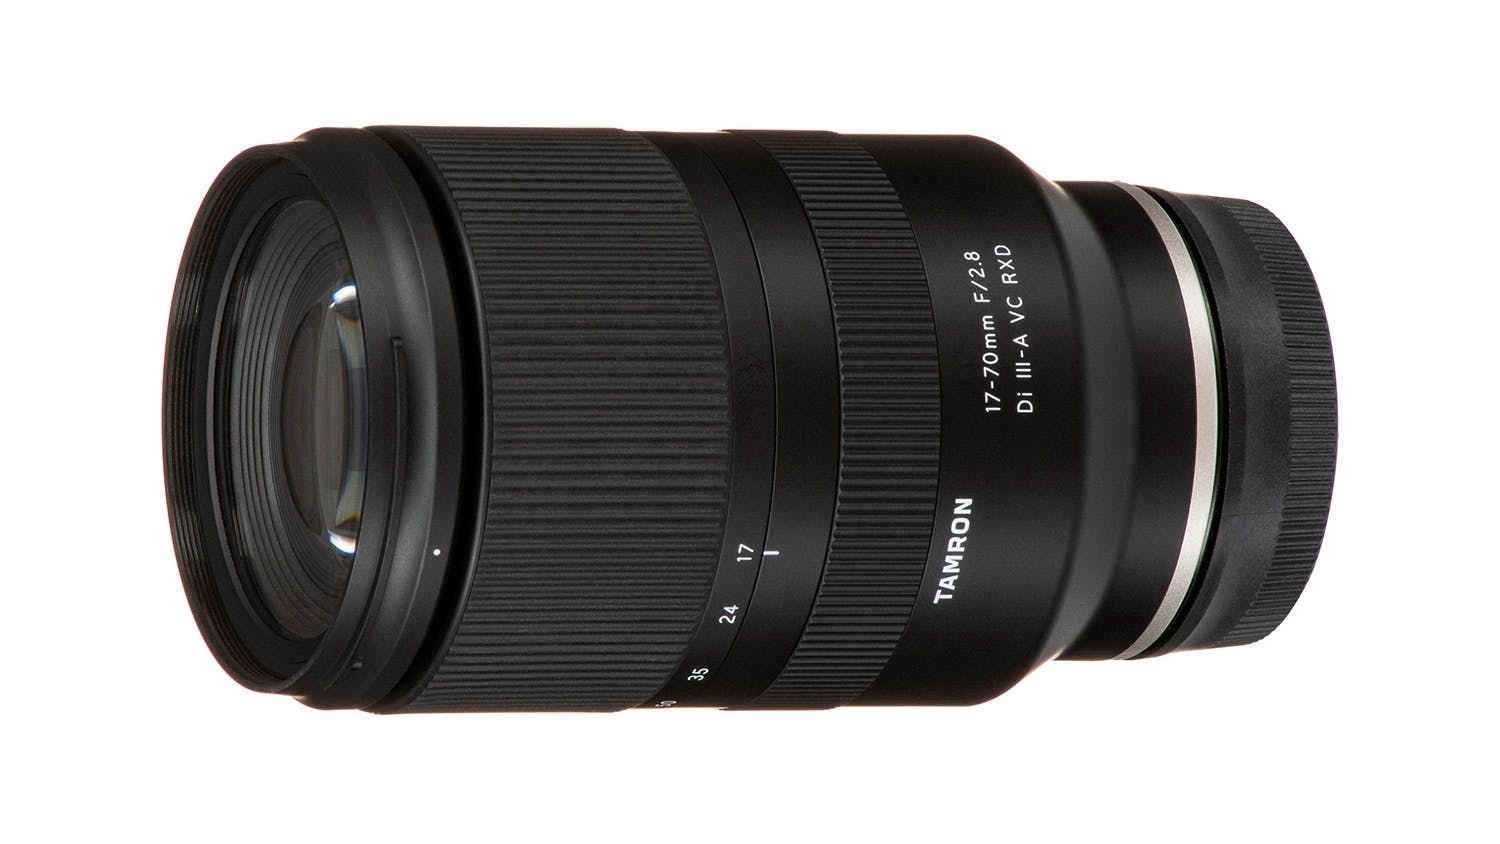 Tamron 17-70mm f/2.8 Di III-A VC RXD Lens for FUJIFILM with Advanced  Accessory and Travel Bundle (Tamron 6 Year USA Warranty)